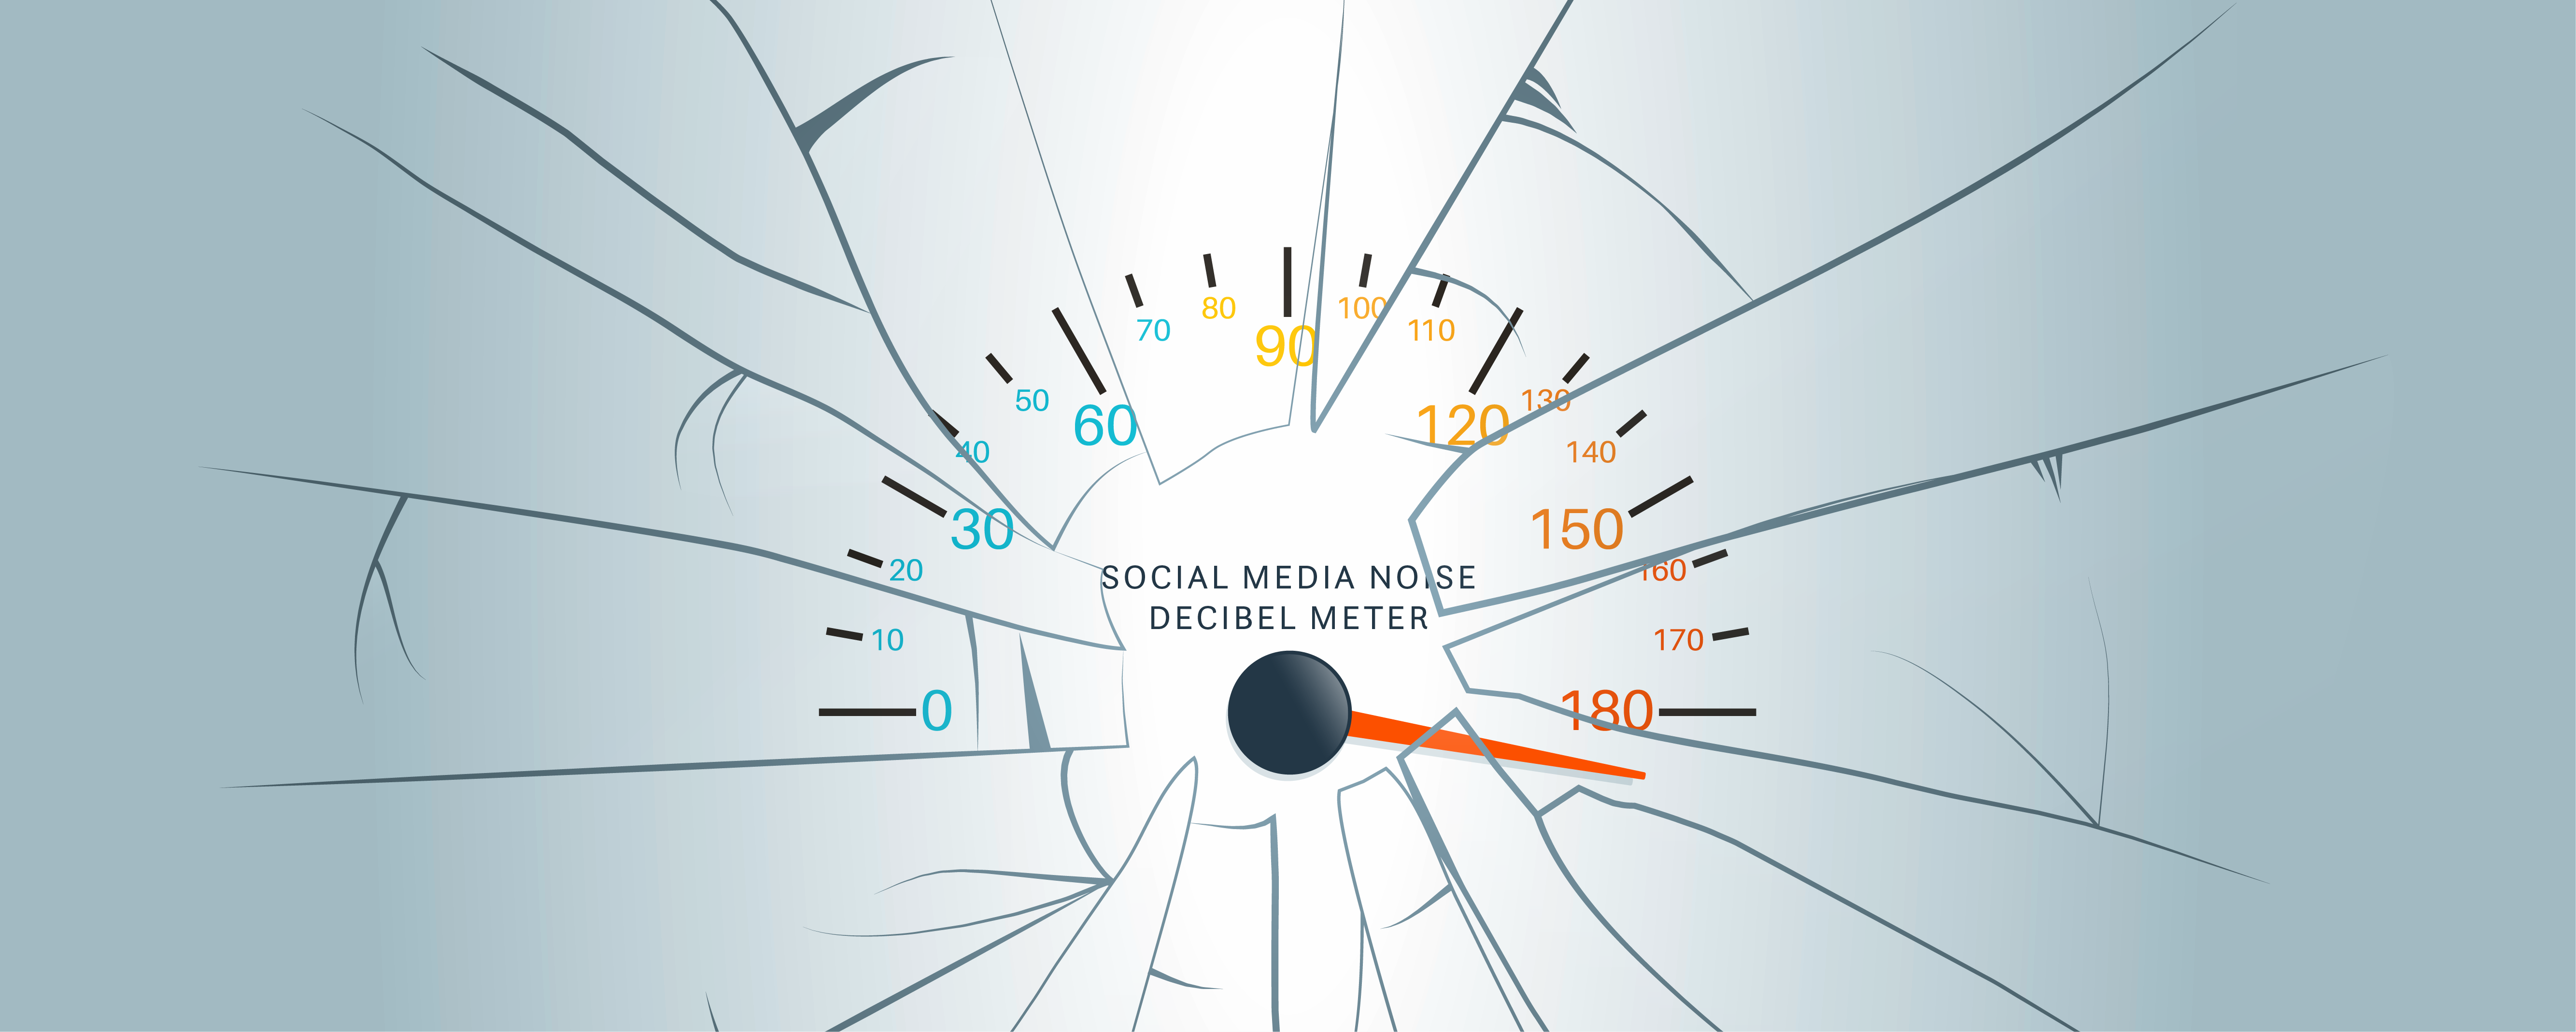 Amp Up Your Social Media to Break Through the Noise Barrier